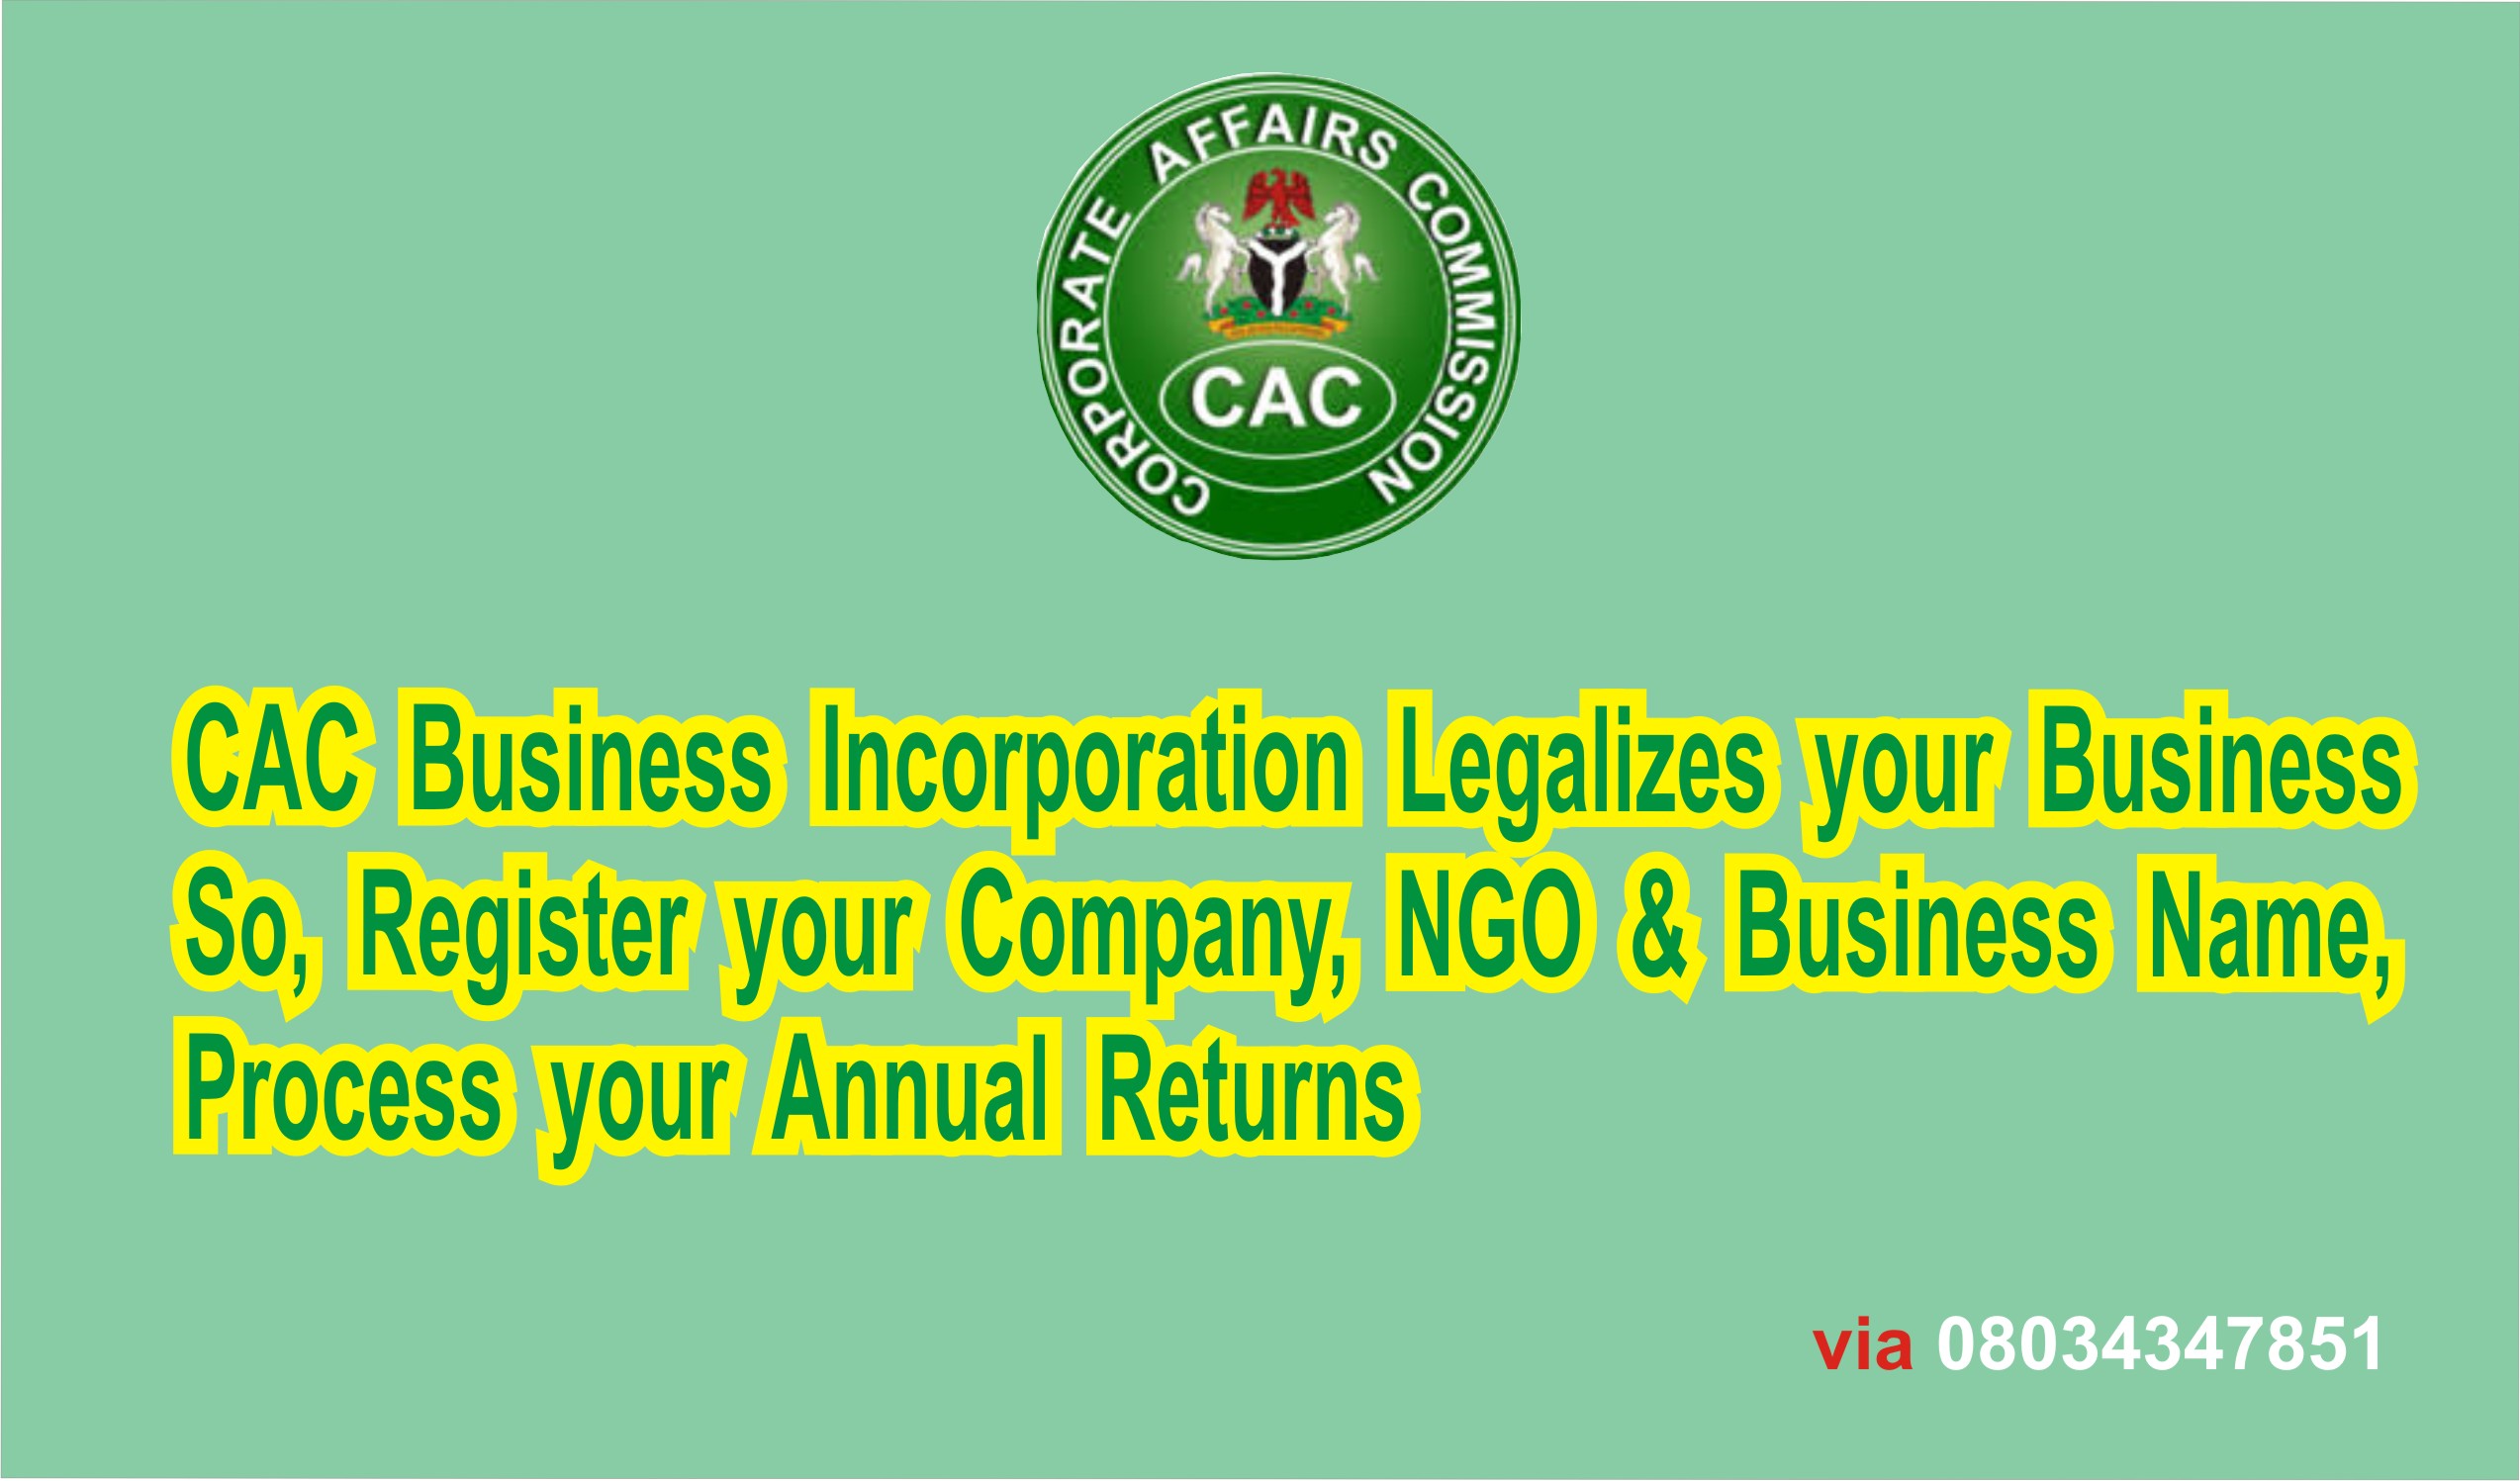 How We Collaborate With CAC In Registering Your Business Names